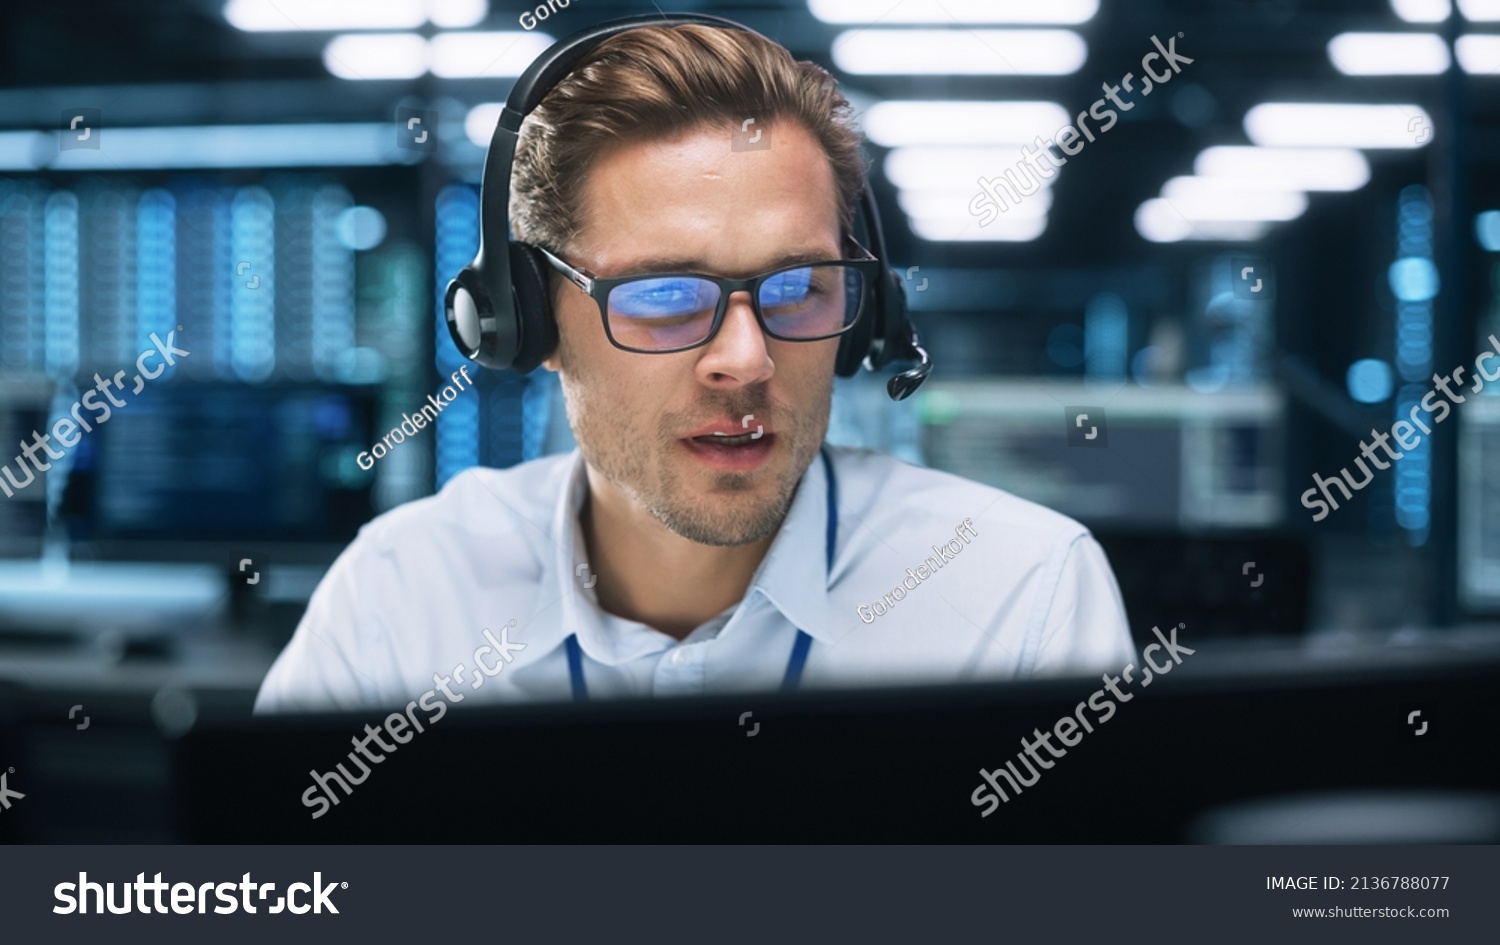 Call Center Worker Wearing Headset Working in Office to Support Remote Customer. Call Center, Telemarketing, Customer Support Agent Provide Service on Video Conference Call. #2136788077